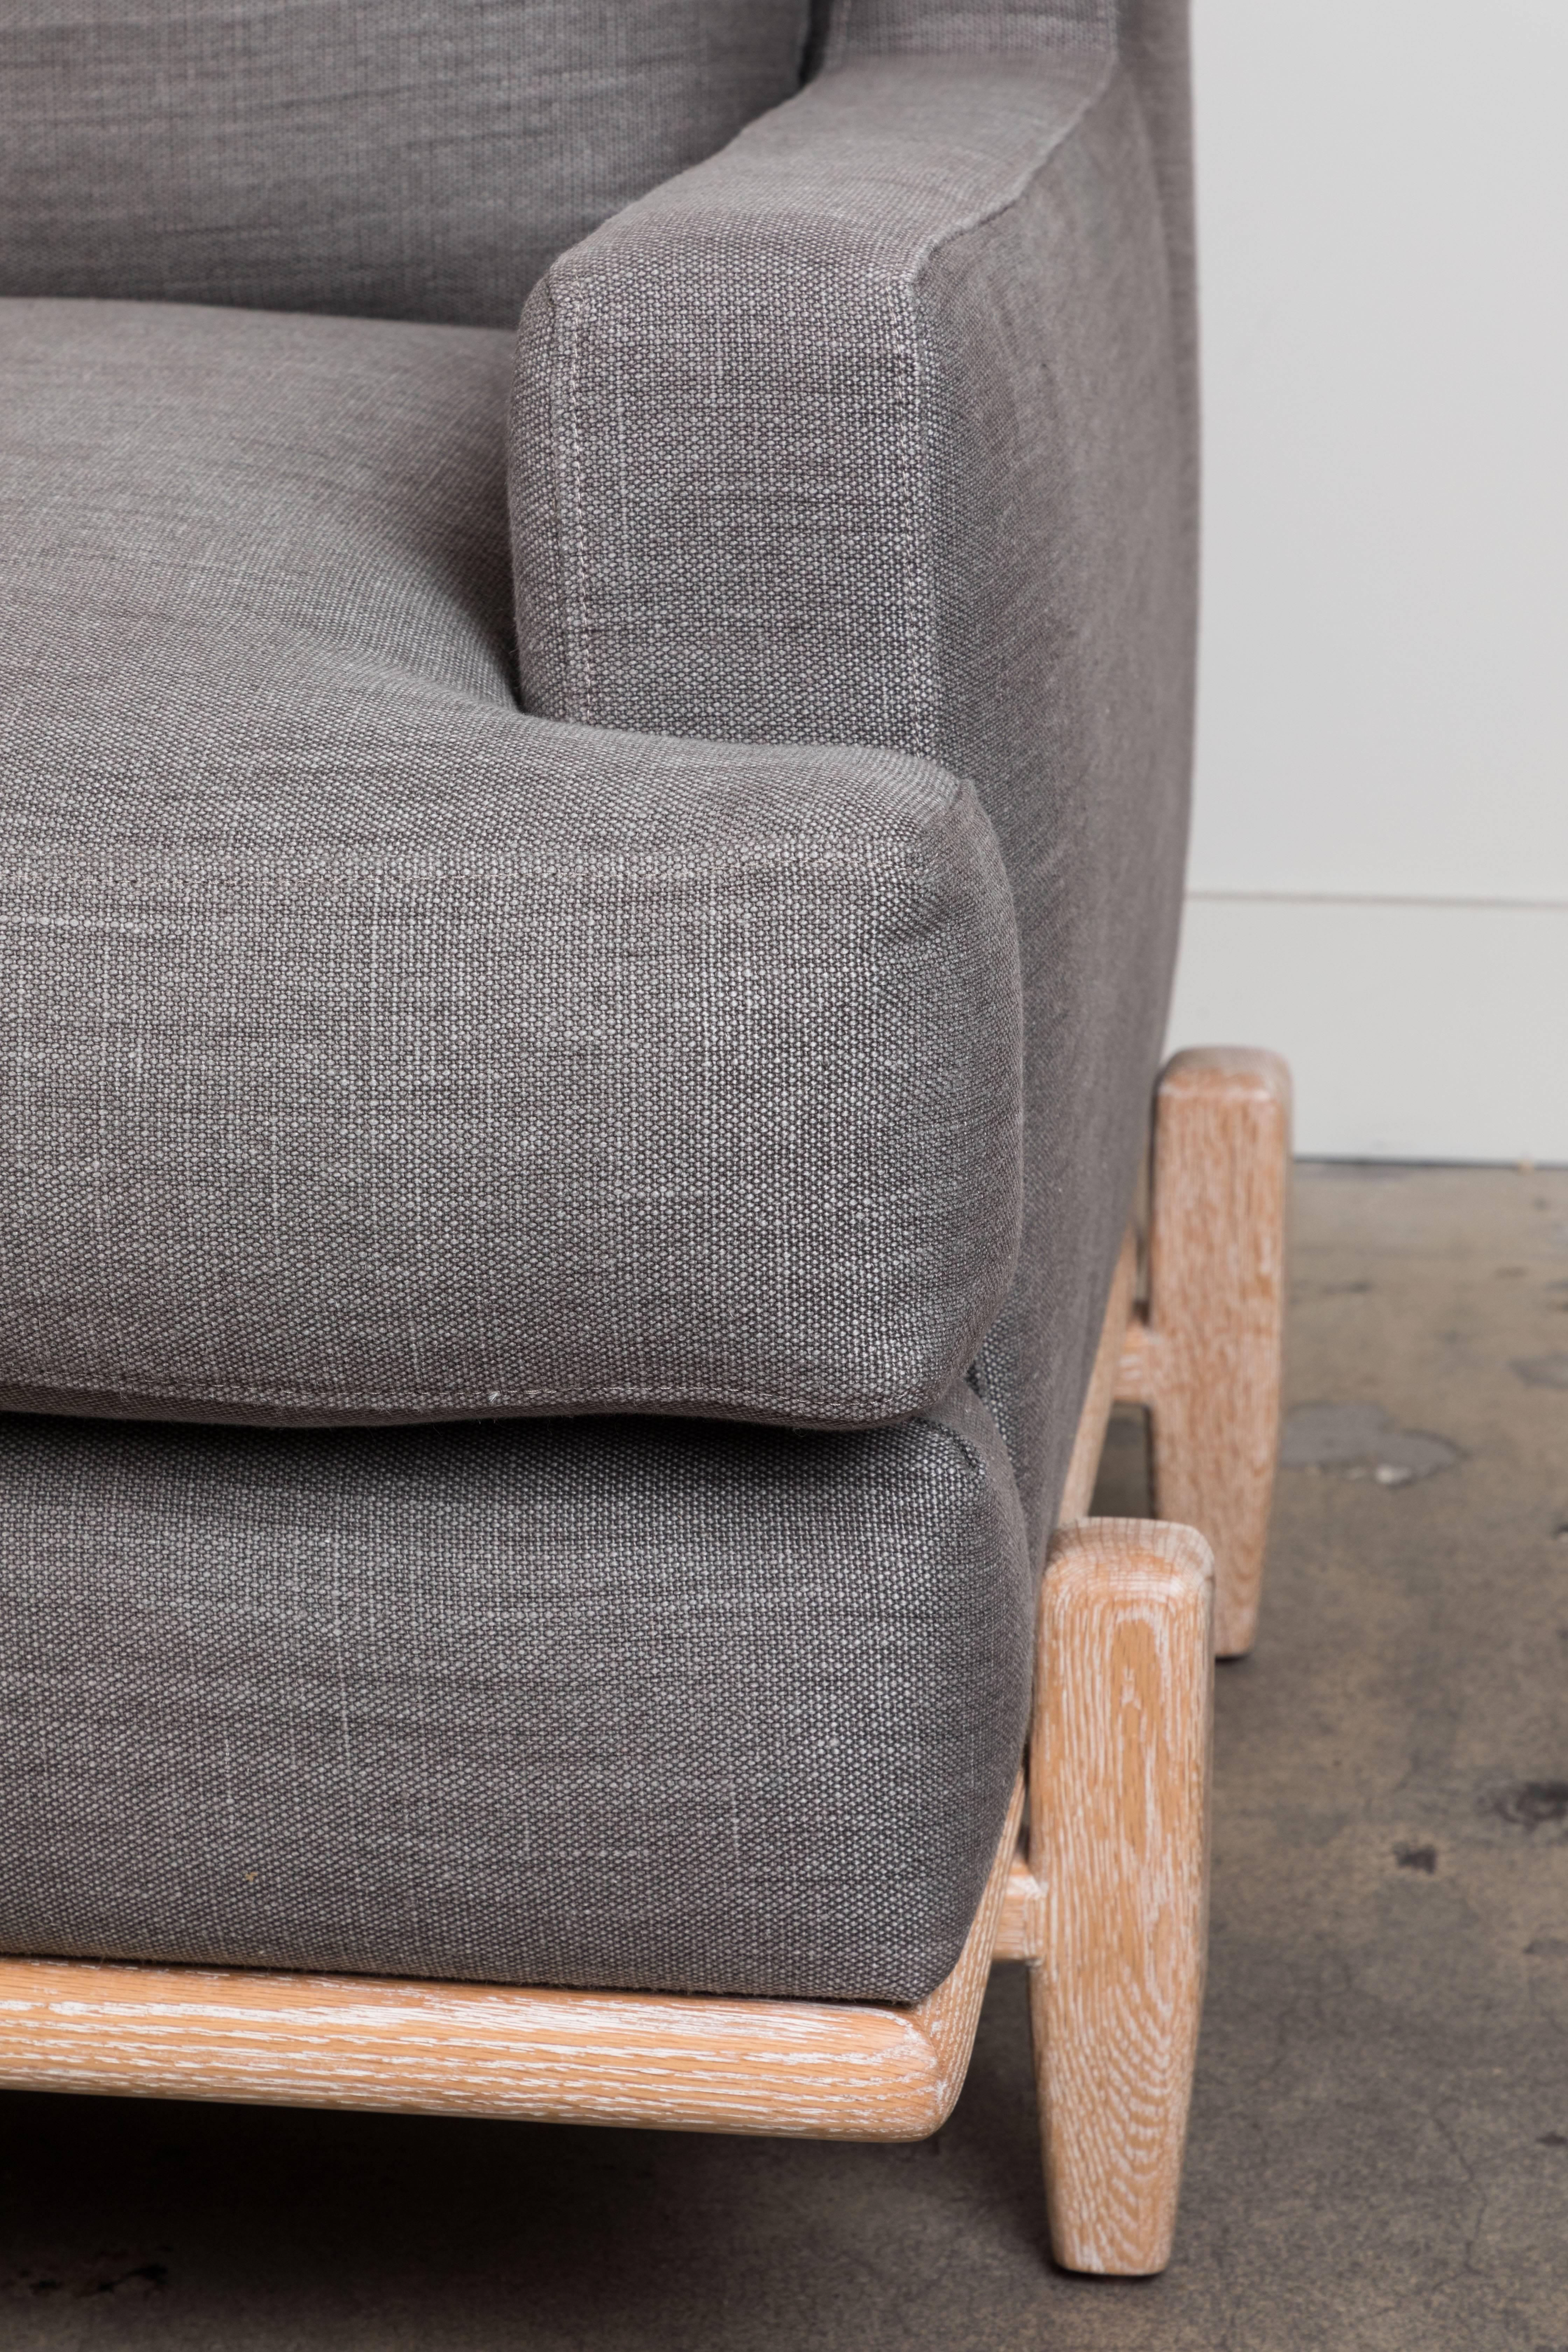 Upholstery George Chair by Brian Paquette for Lawson-Fenning